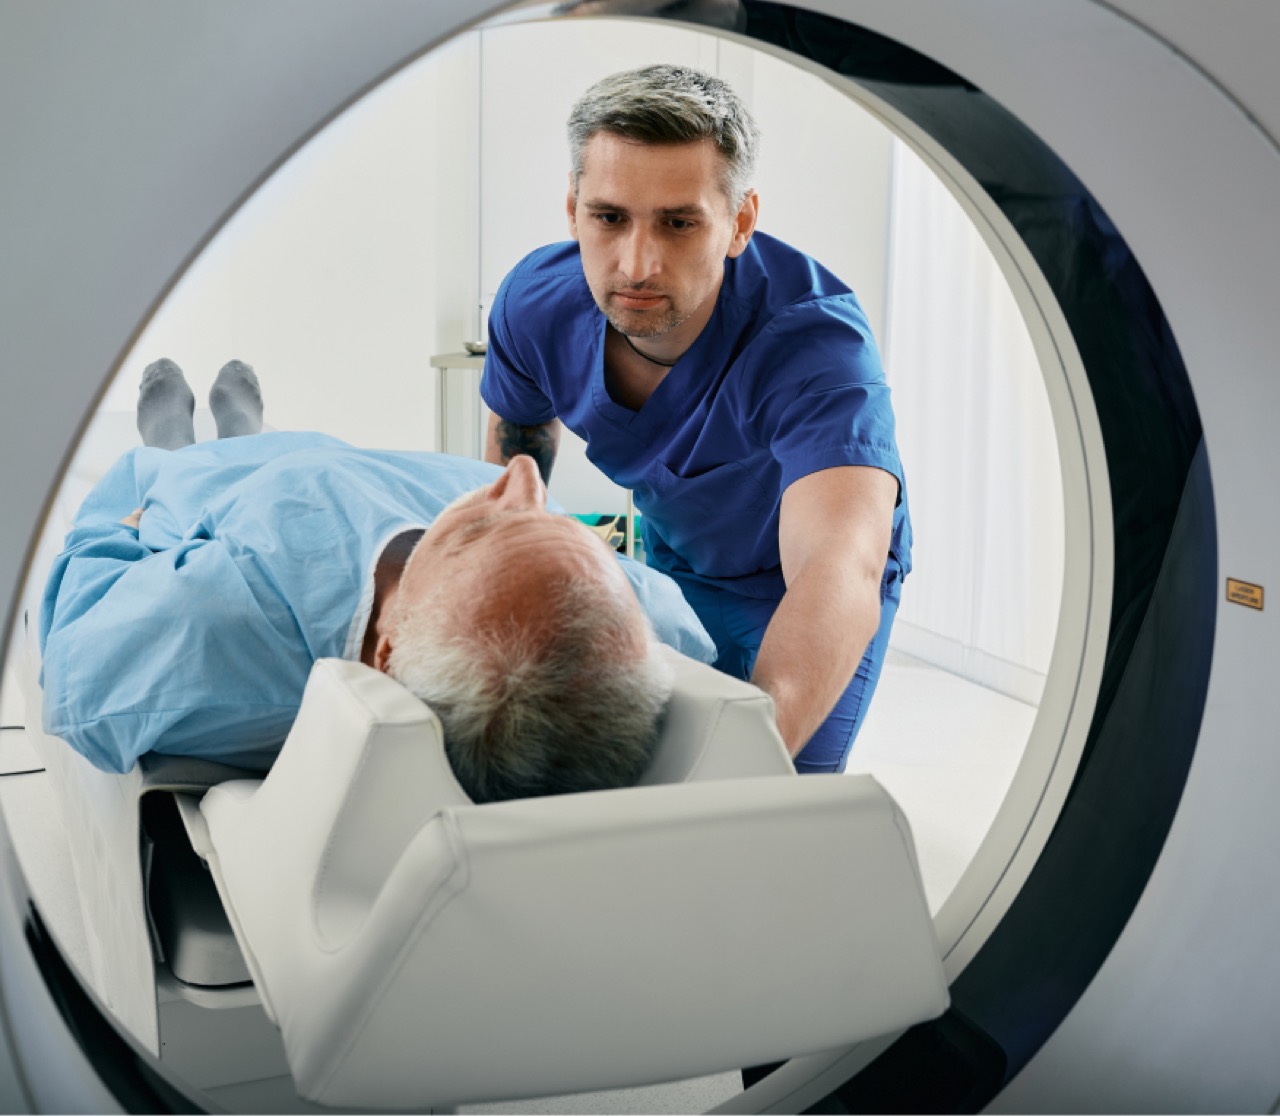 A doctor placing a man in an MRI scanner